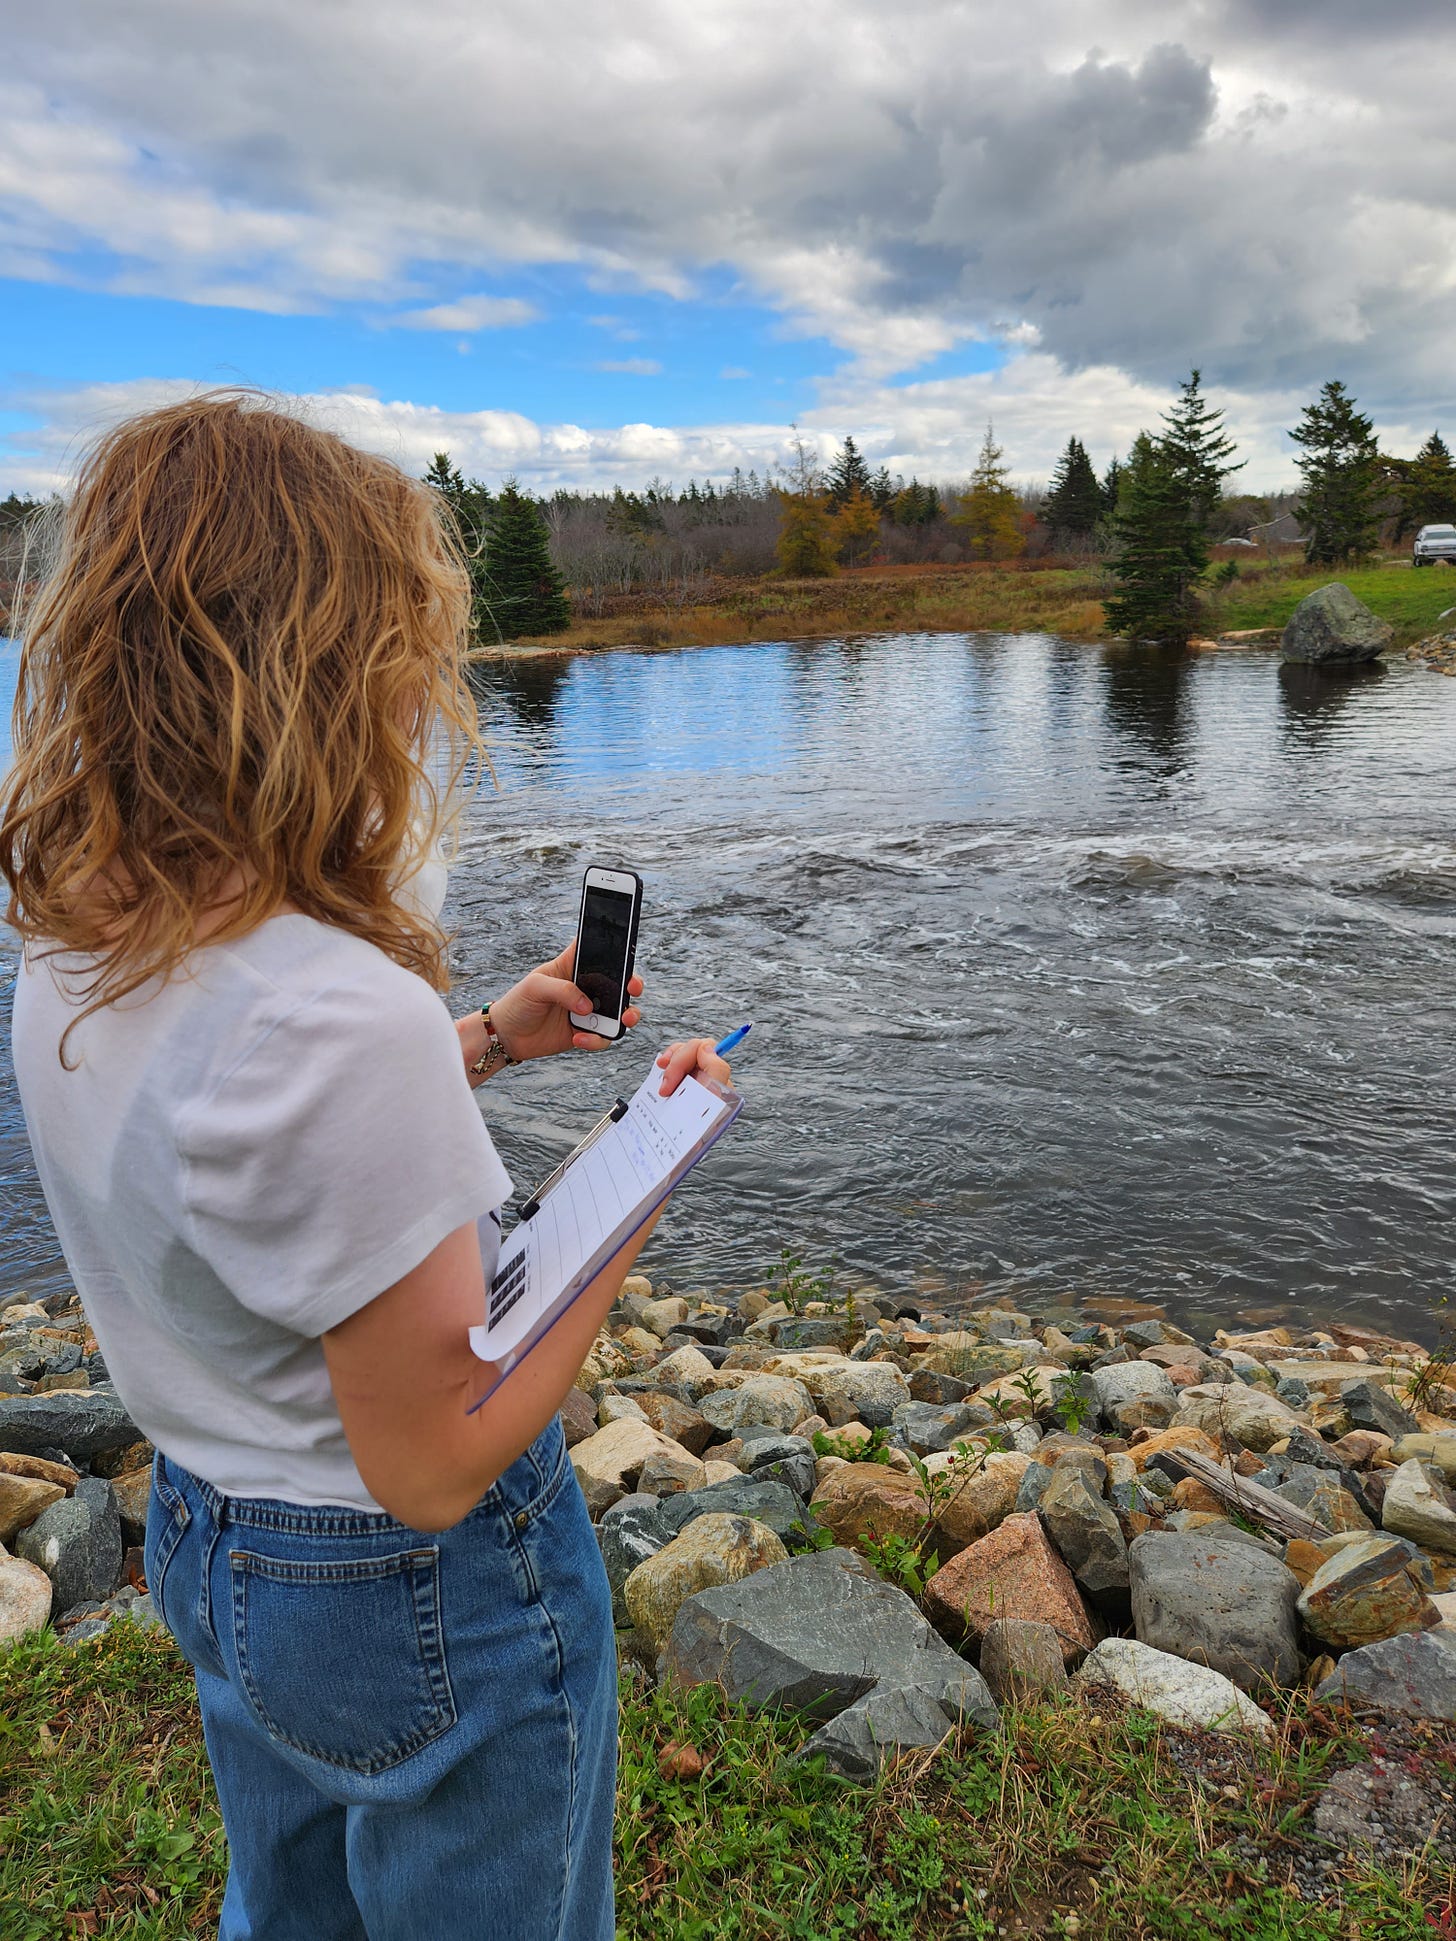 A young woman wearing a white tee shirt and blue jeans standing on a rocky shore is taking a picture of the water with her iphone with her left hand. She holds a pen and papers on a clipboard in her right hand.